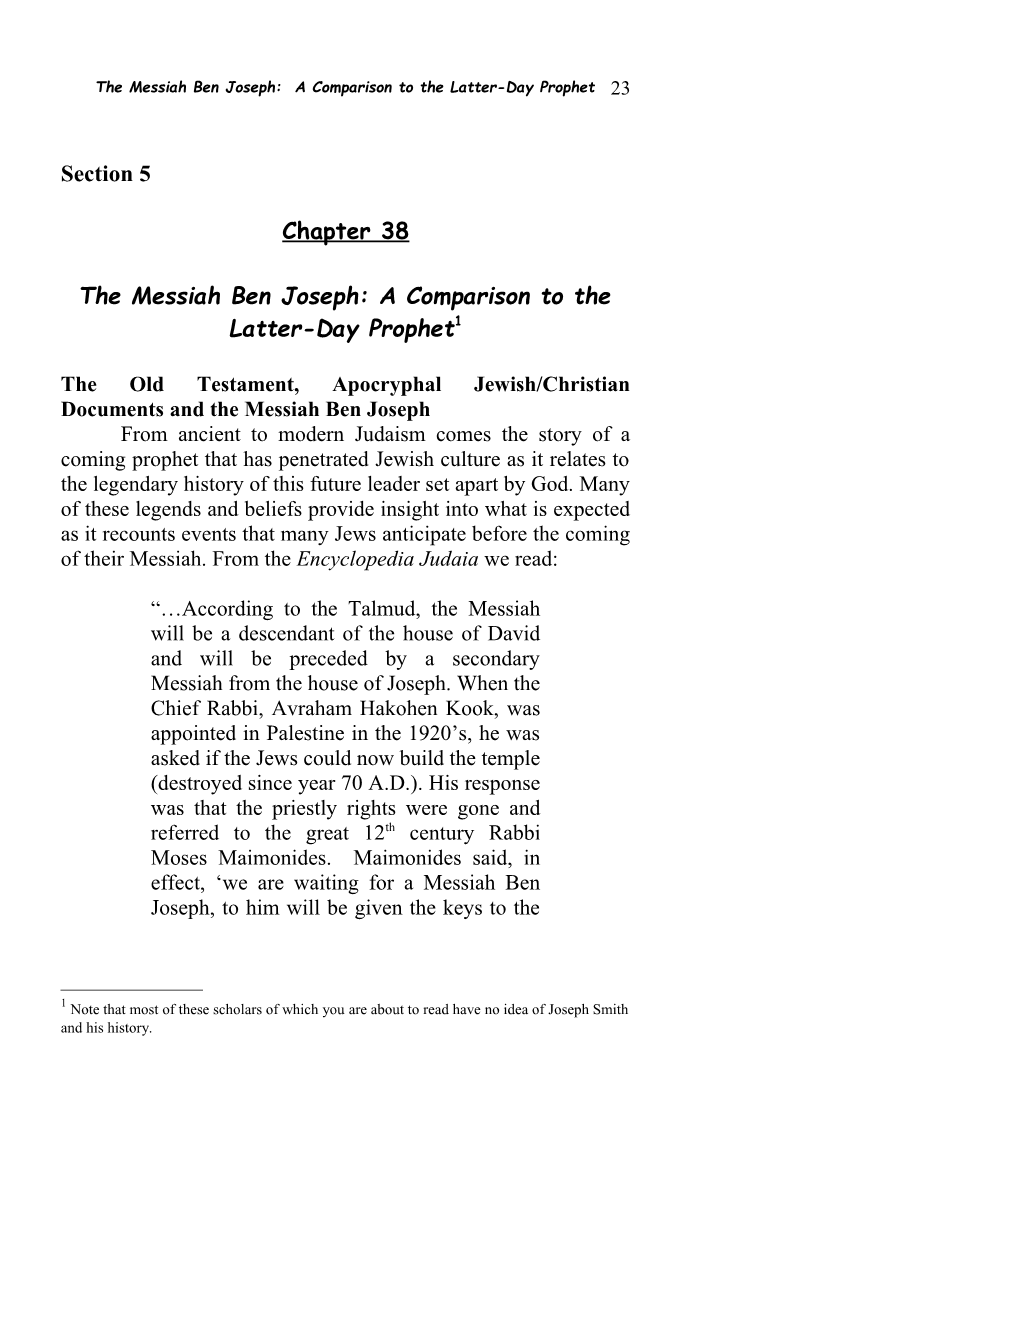 Section I: Joseph Smith and the Restoration Prophicied in Ancient Scritpure